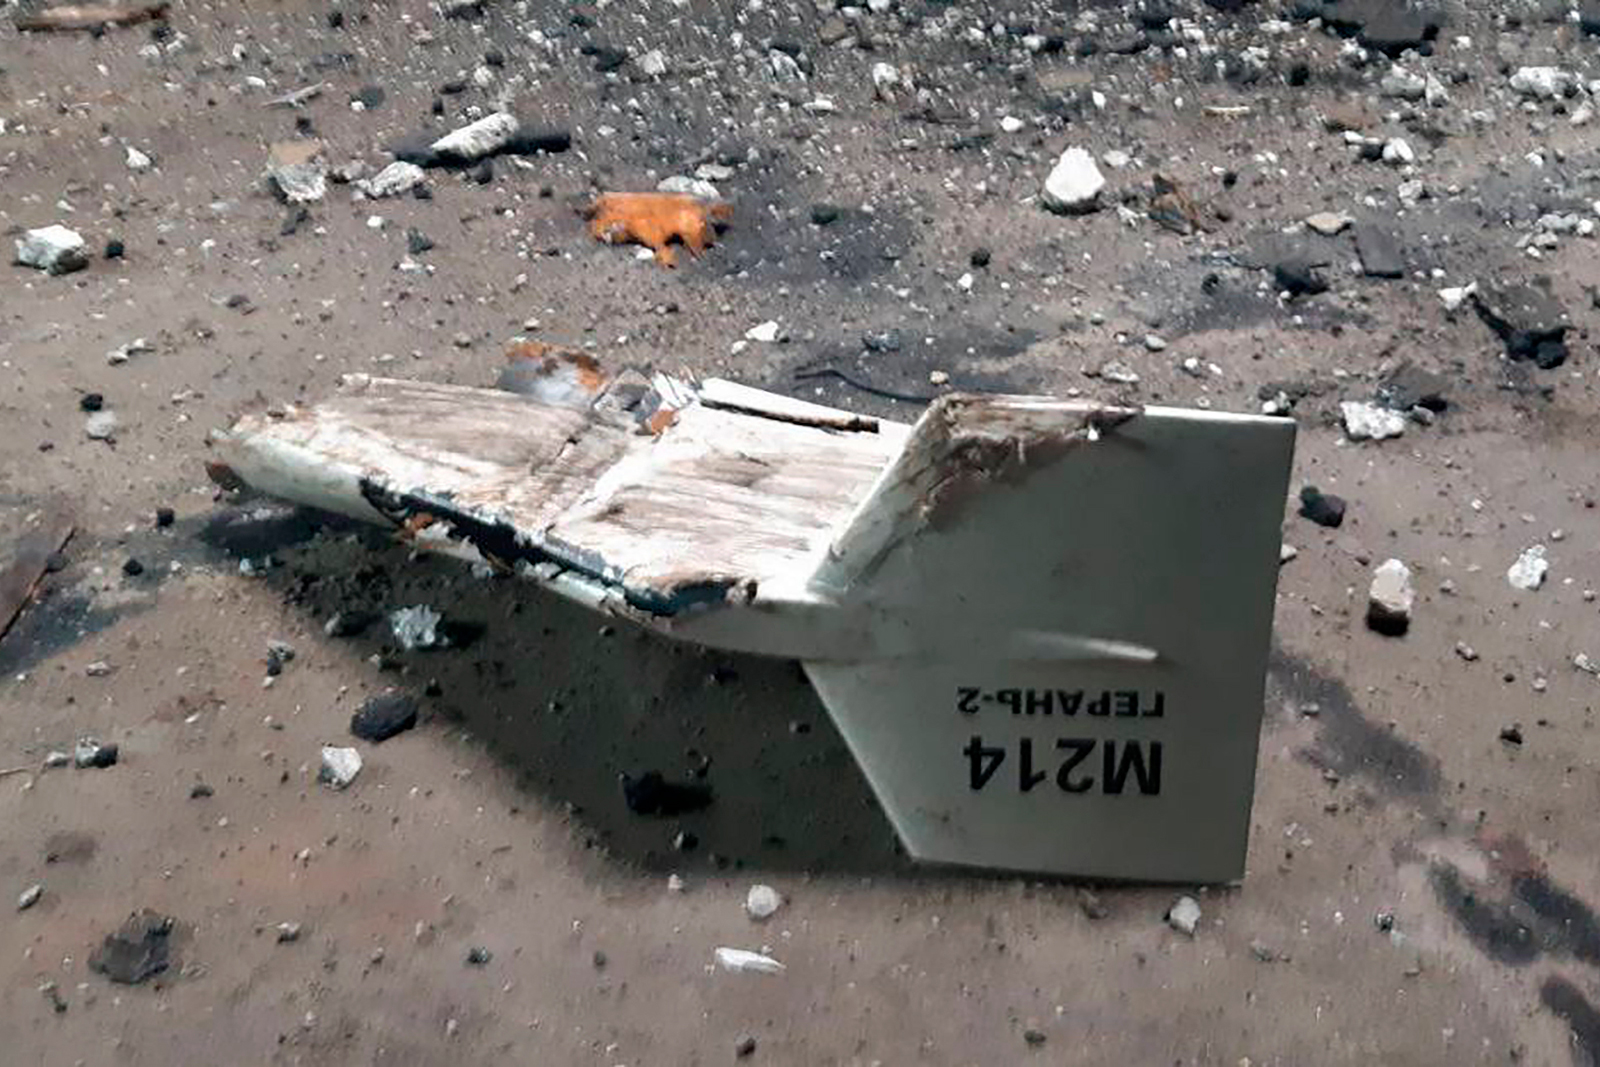 The wreckage of what Kyiv has described as an Iranian Shahed drone downed is seen near Kupiansk on September. 